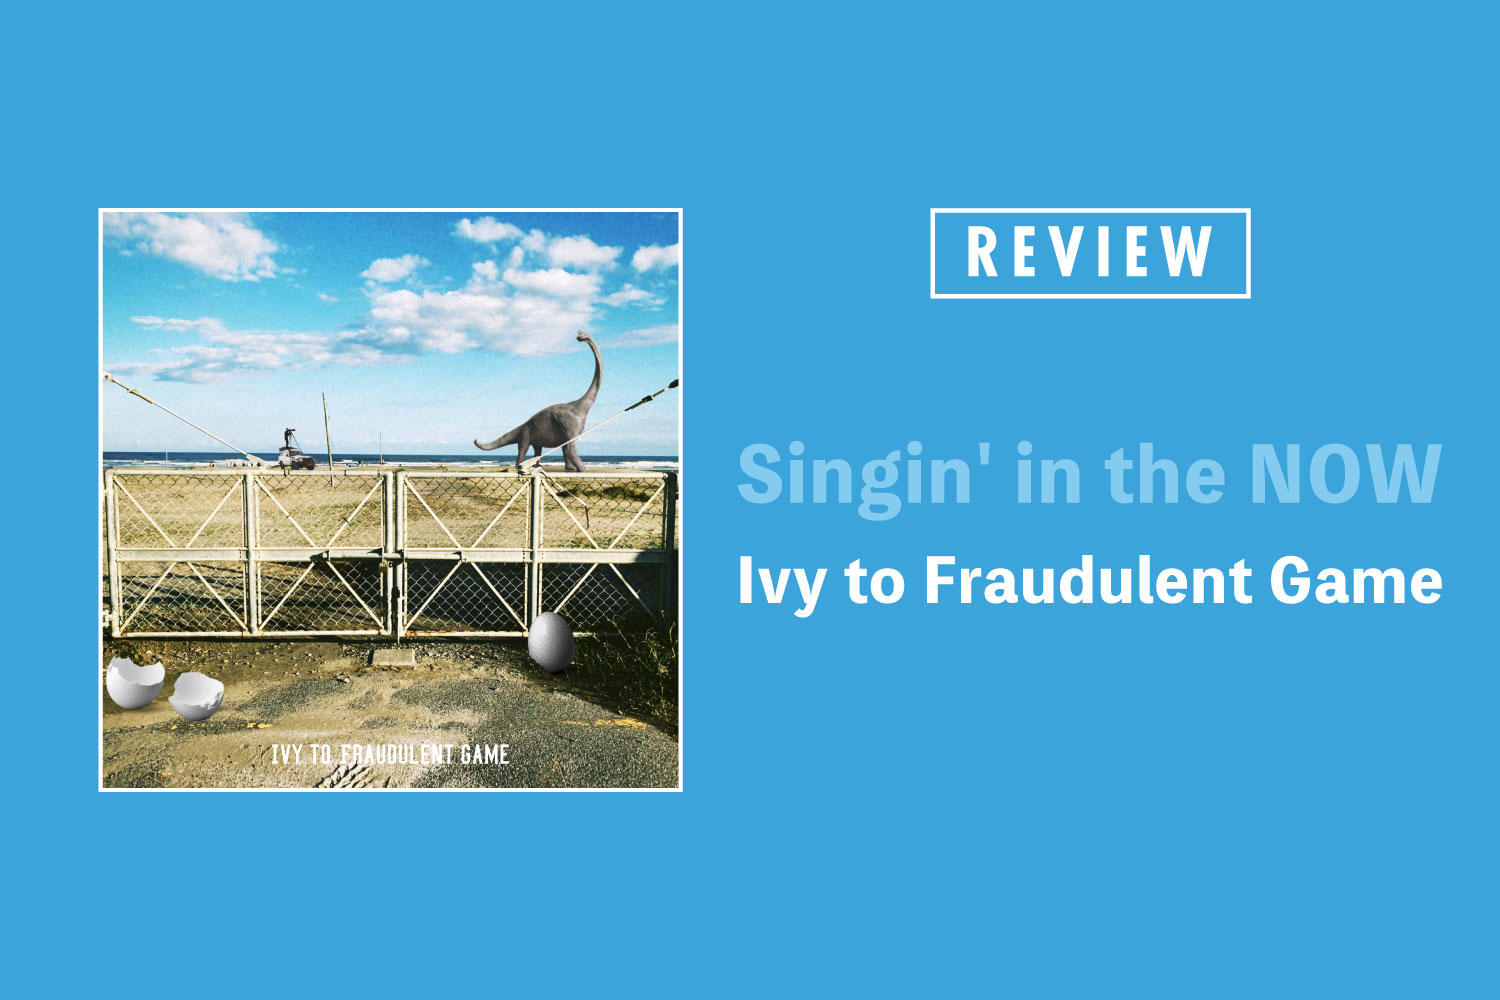 Ivy to Fraudulent Game「Singin' in the NOW」──多彩な曲の数々とともに打ち出したアイビーの最新モード